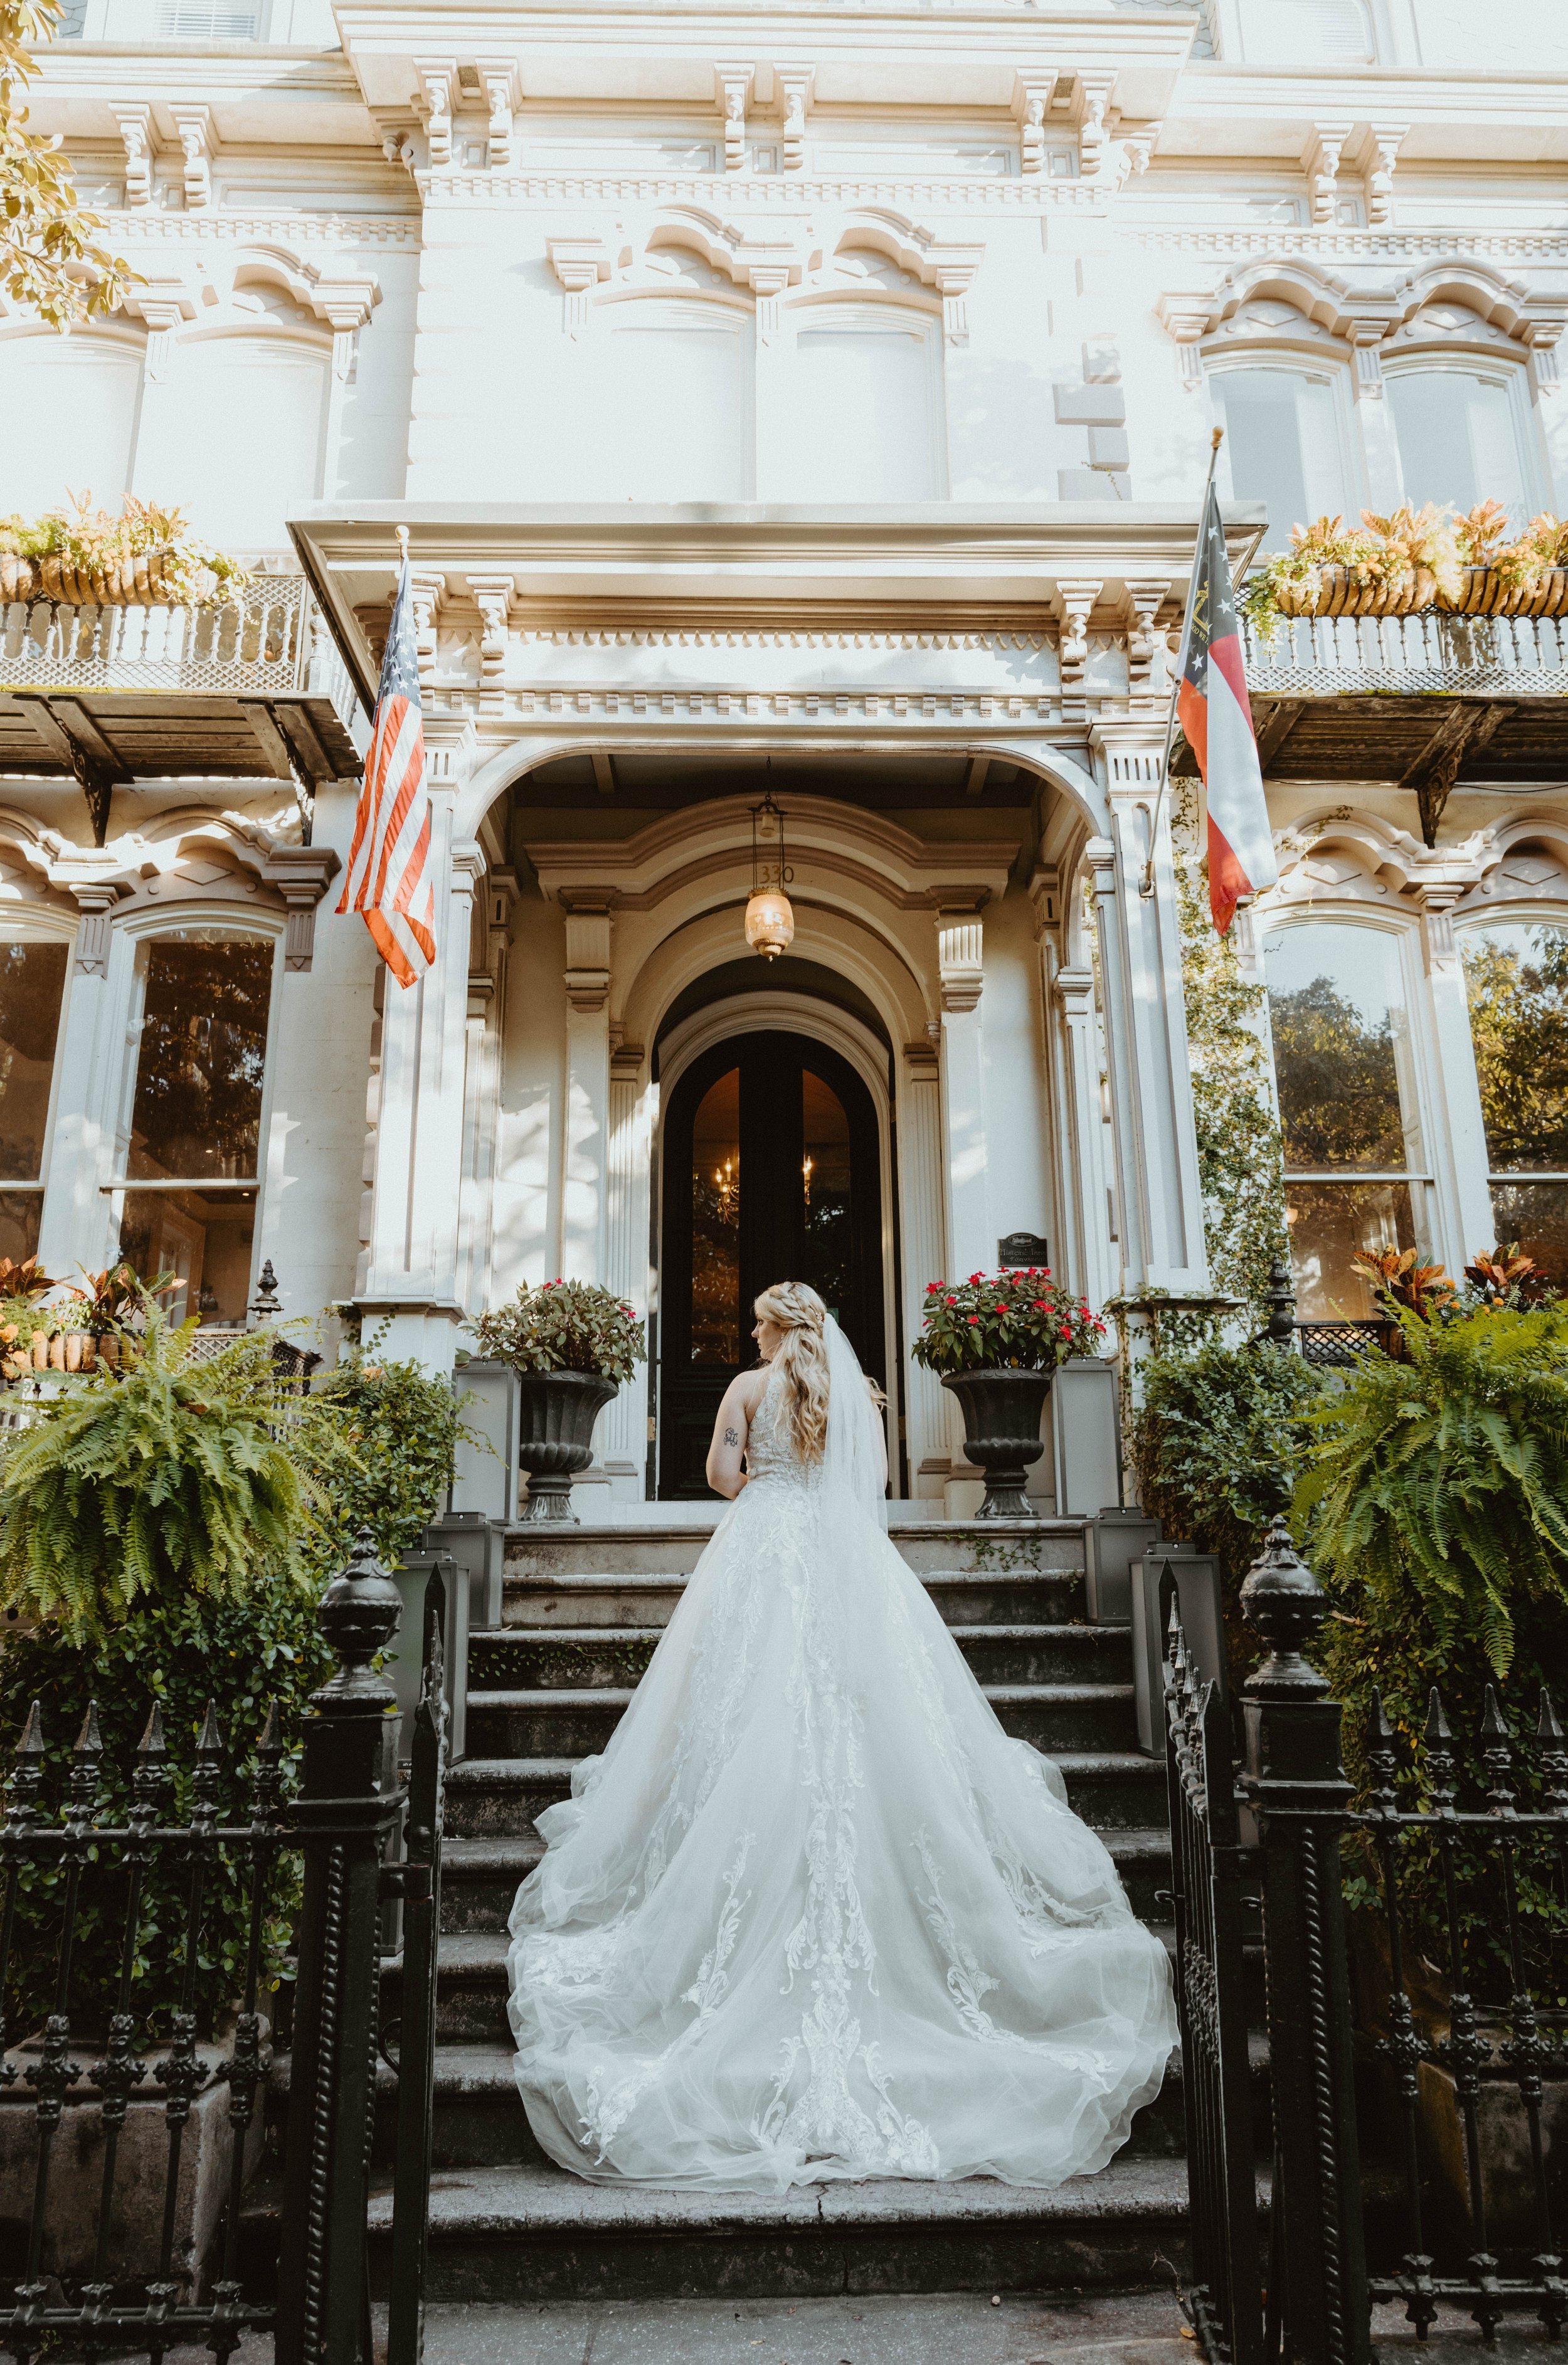 Ivory-and-beau-bride-ansley-bought-sparkly-and-traditional-highneck-ballgown-at-savannah-bridal-shop-gets-married-at-cathedral-with-the-help-of-ivory-and-beau-who-created-floral-peices-for-the-ceremony-and-reception-in-their-savannah-florwer-shop-15.jpg